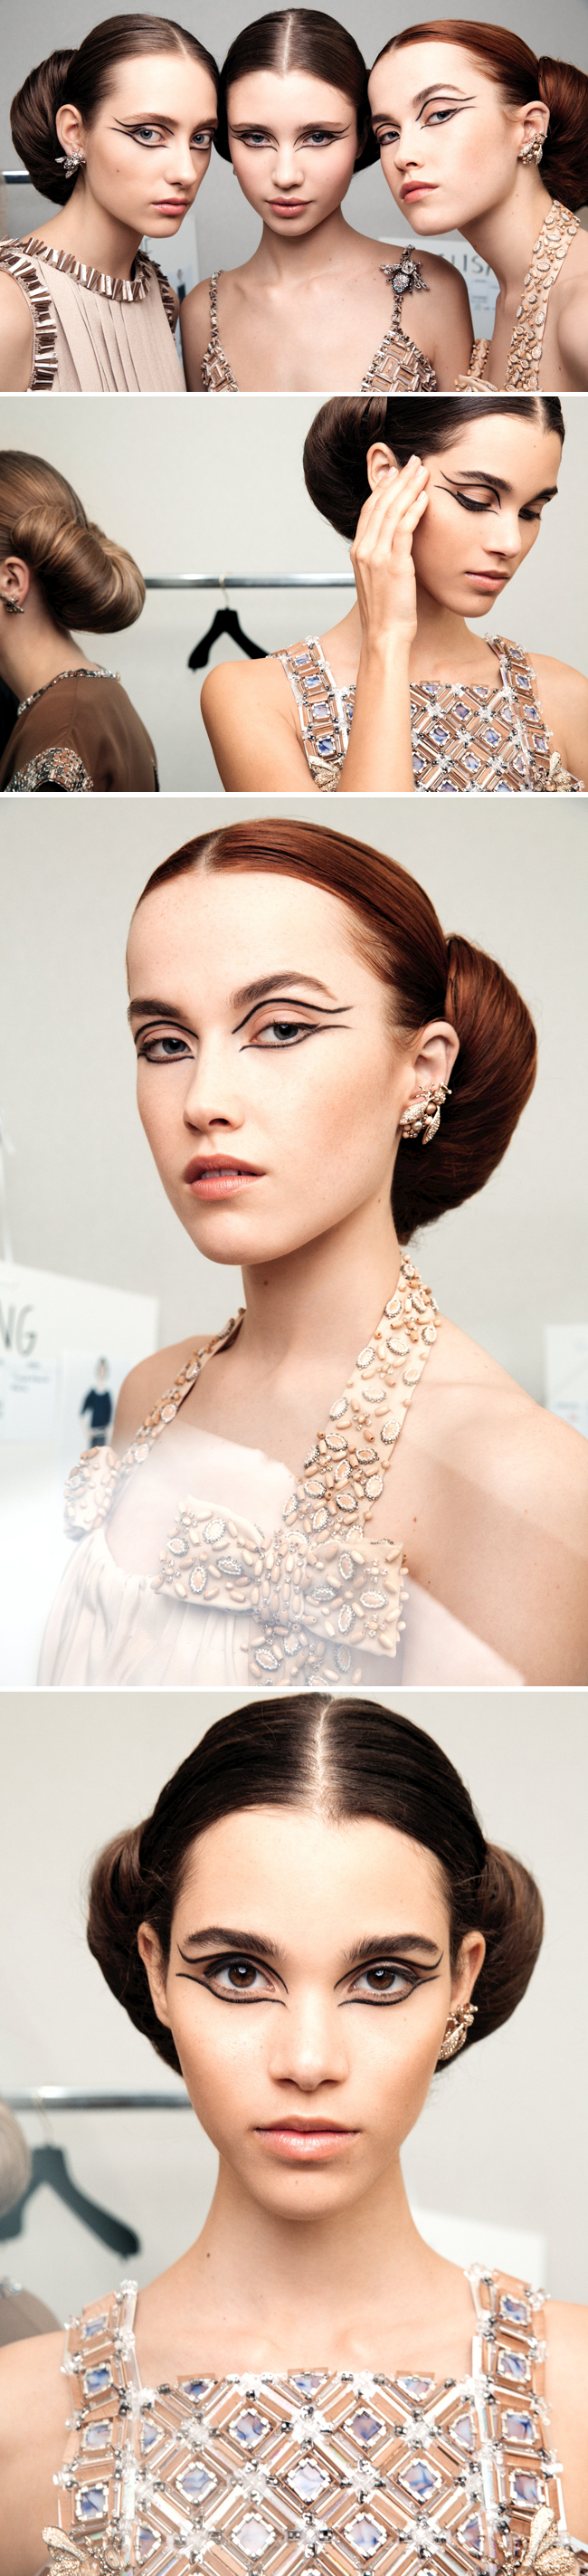 Backstage at Chanel Fashion Show, Chanel Spring 2016 Haute Couture, Chanel Haute Couture, Chanel Beauty, Chanel Makeup